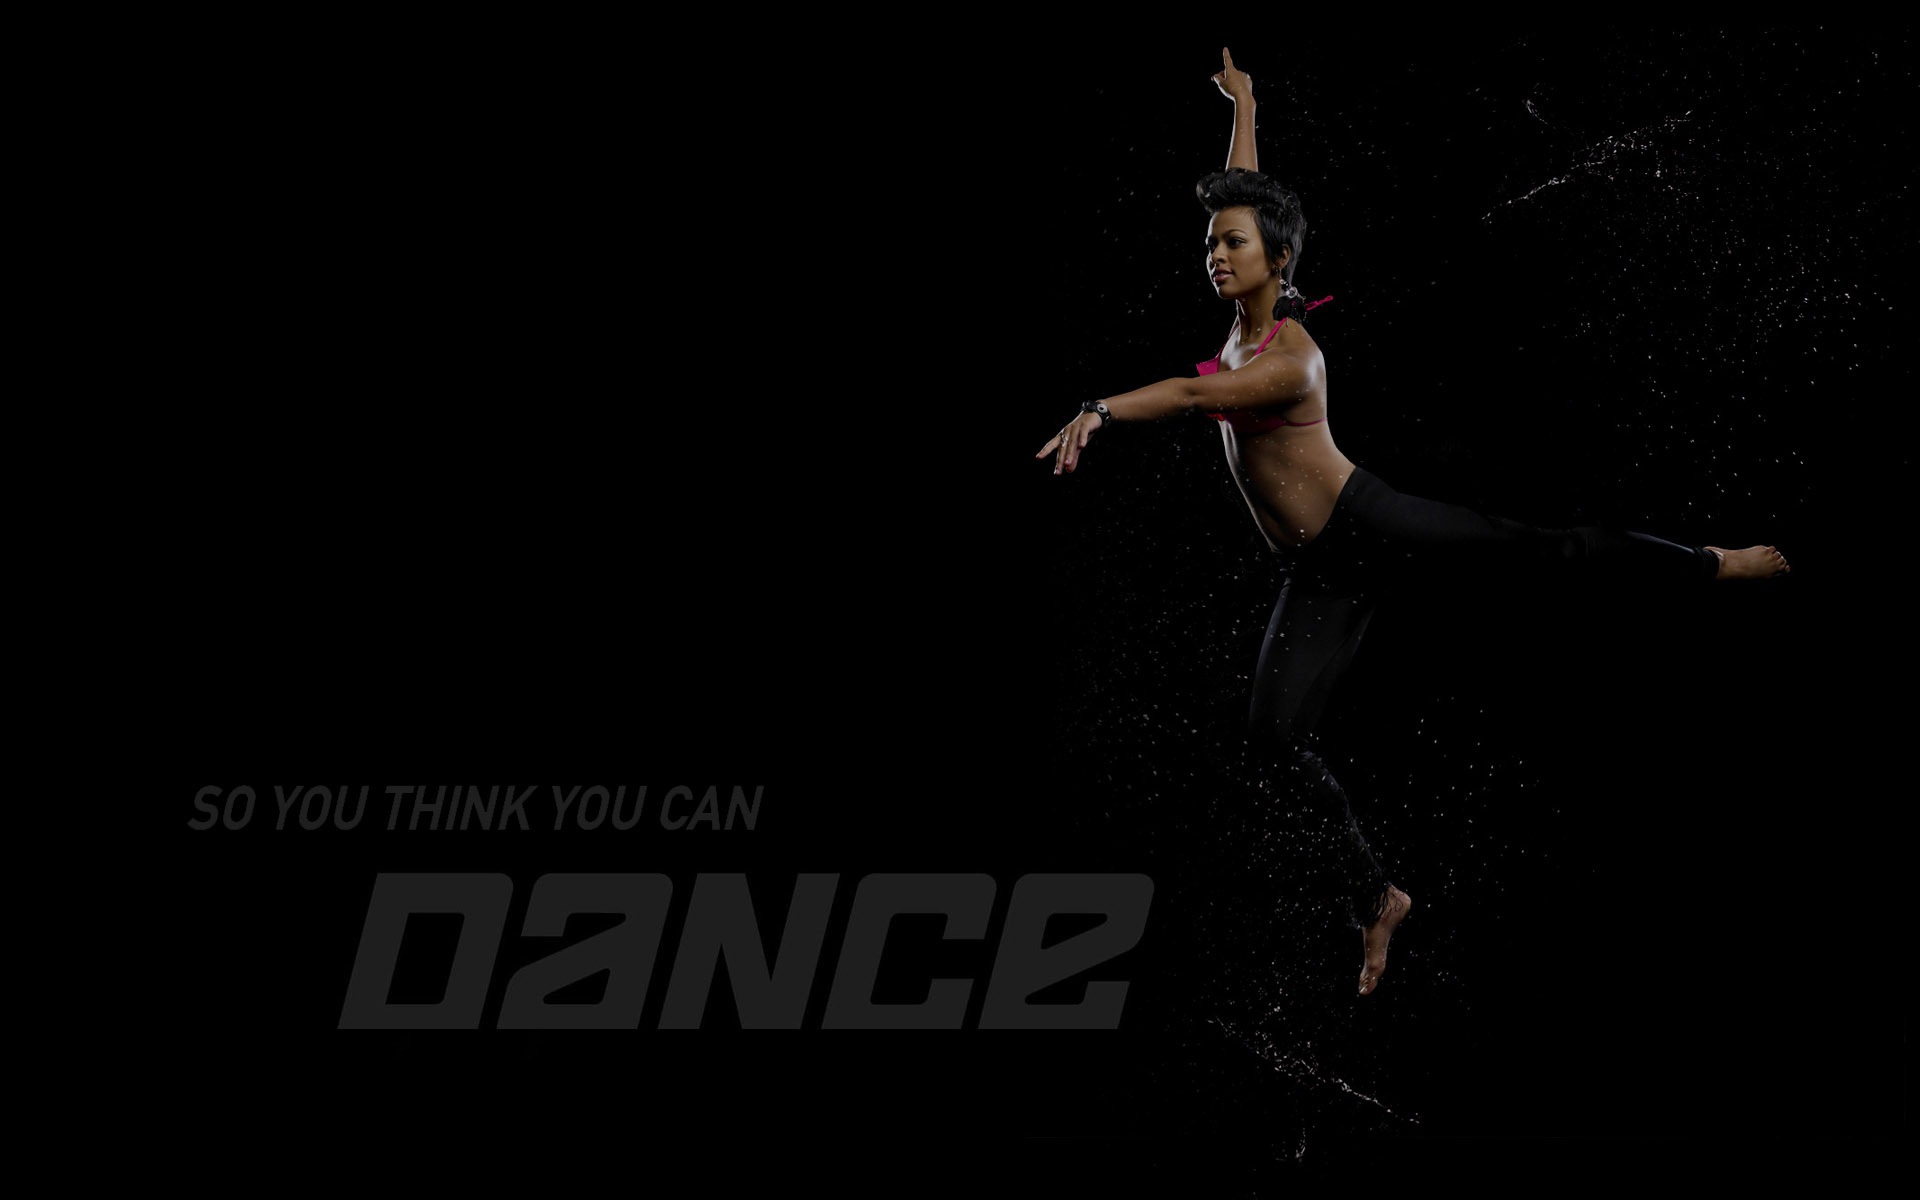 So You Think You Can Dance wallpaper (2) #9 - 1920x1200